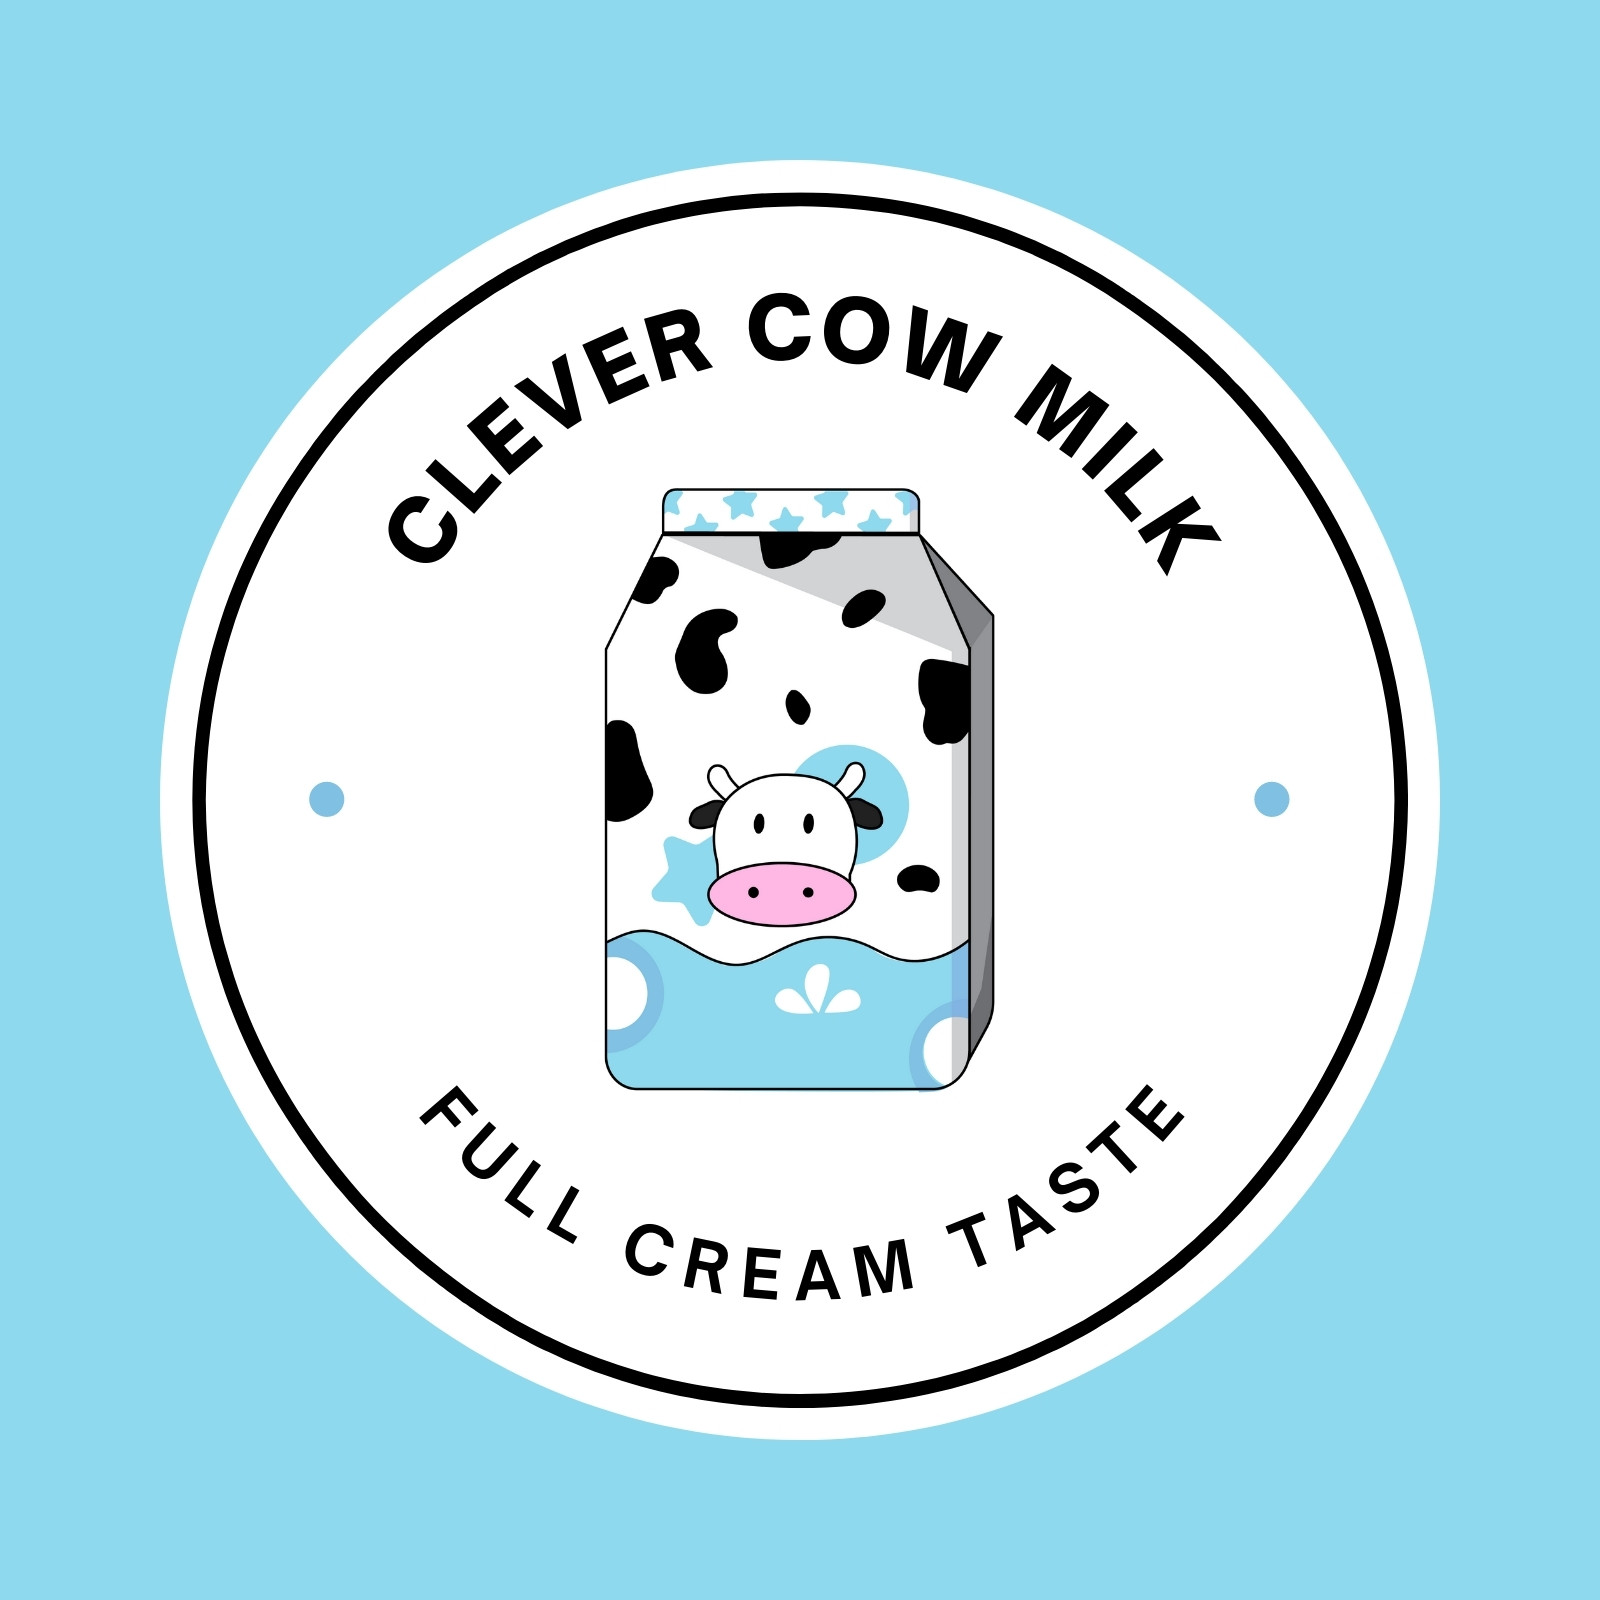 Cow Milk Animals Animal Logos from GraphicRiver